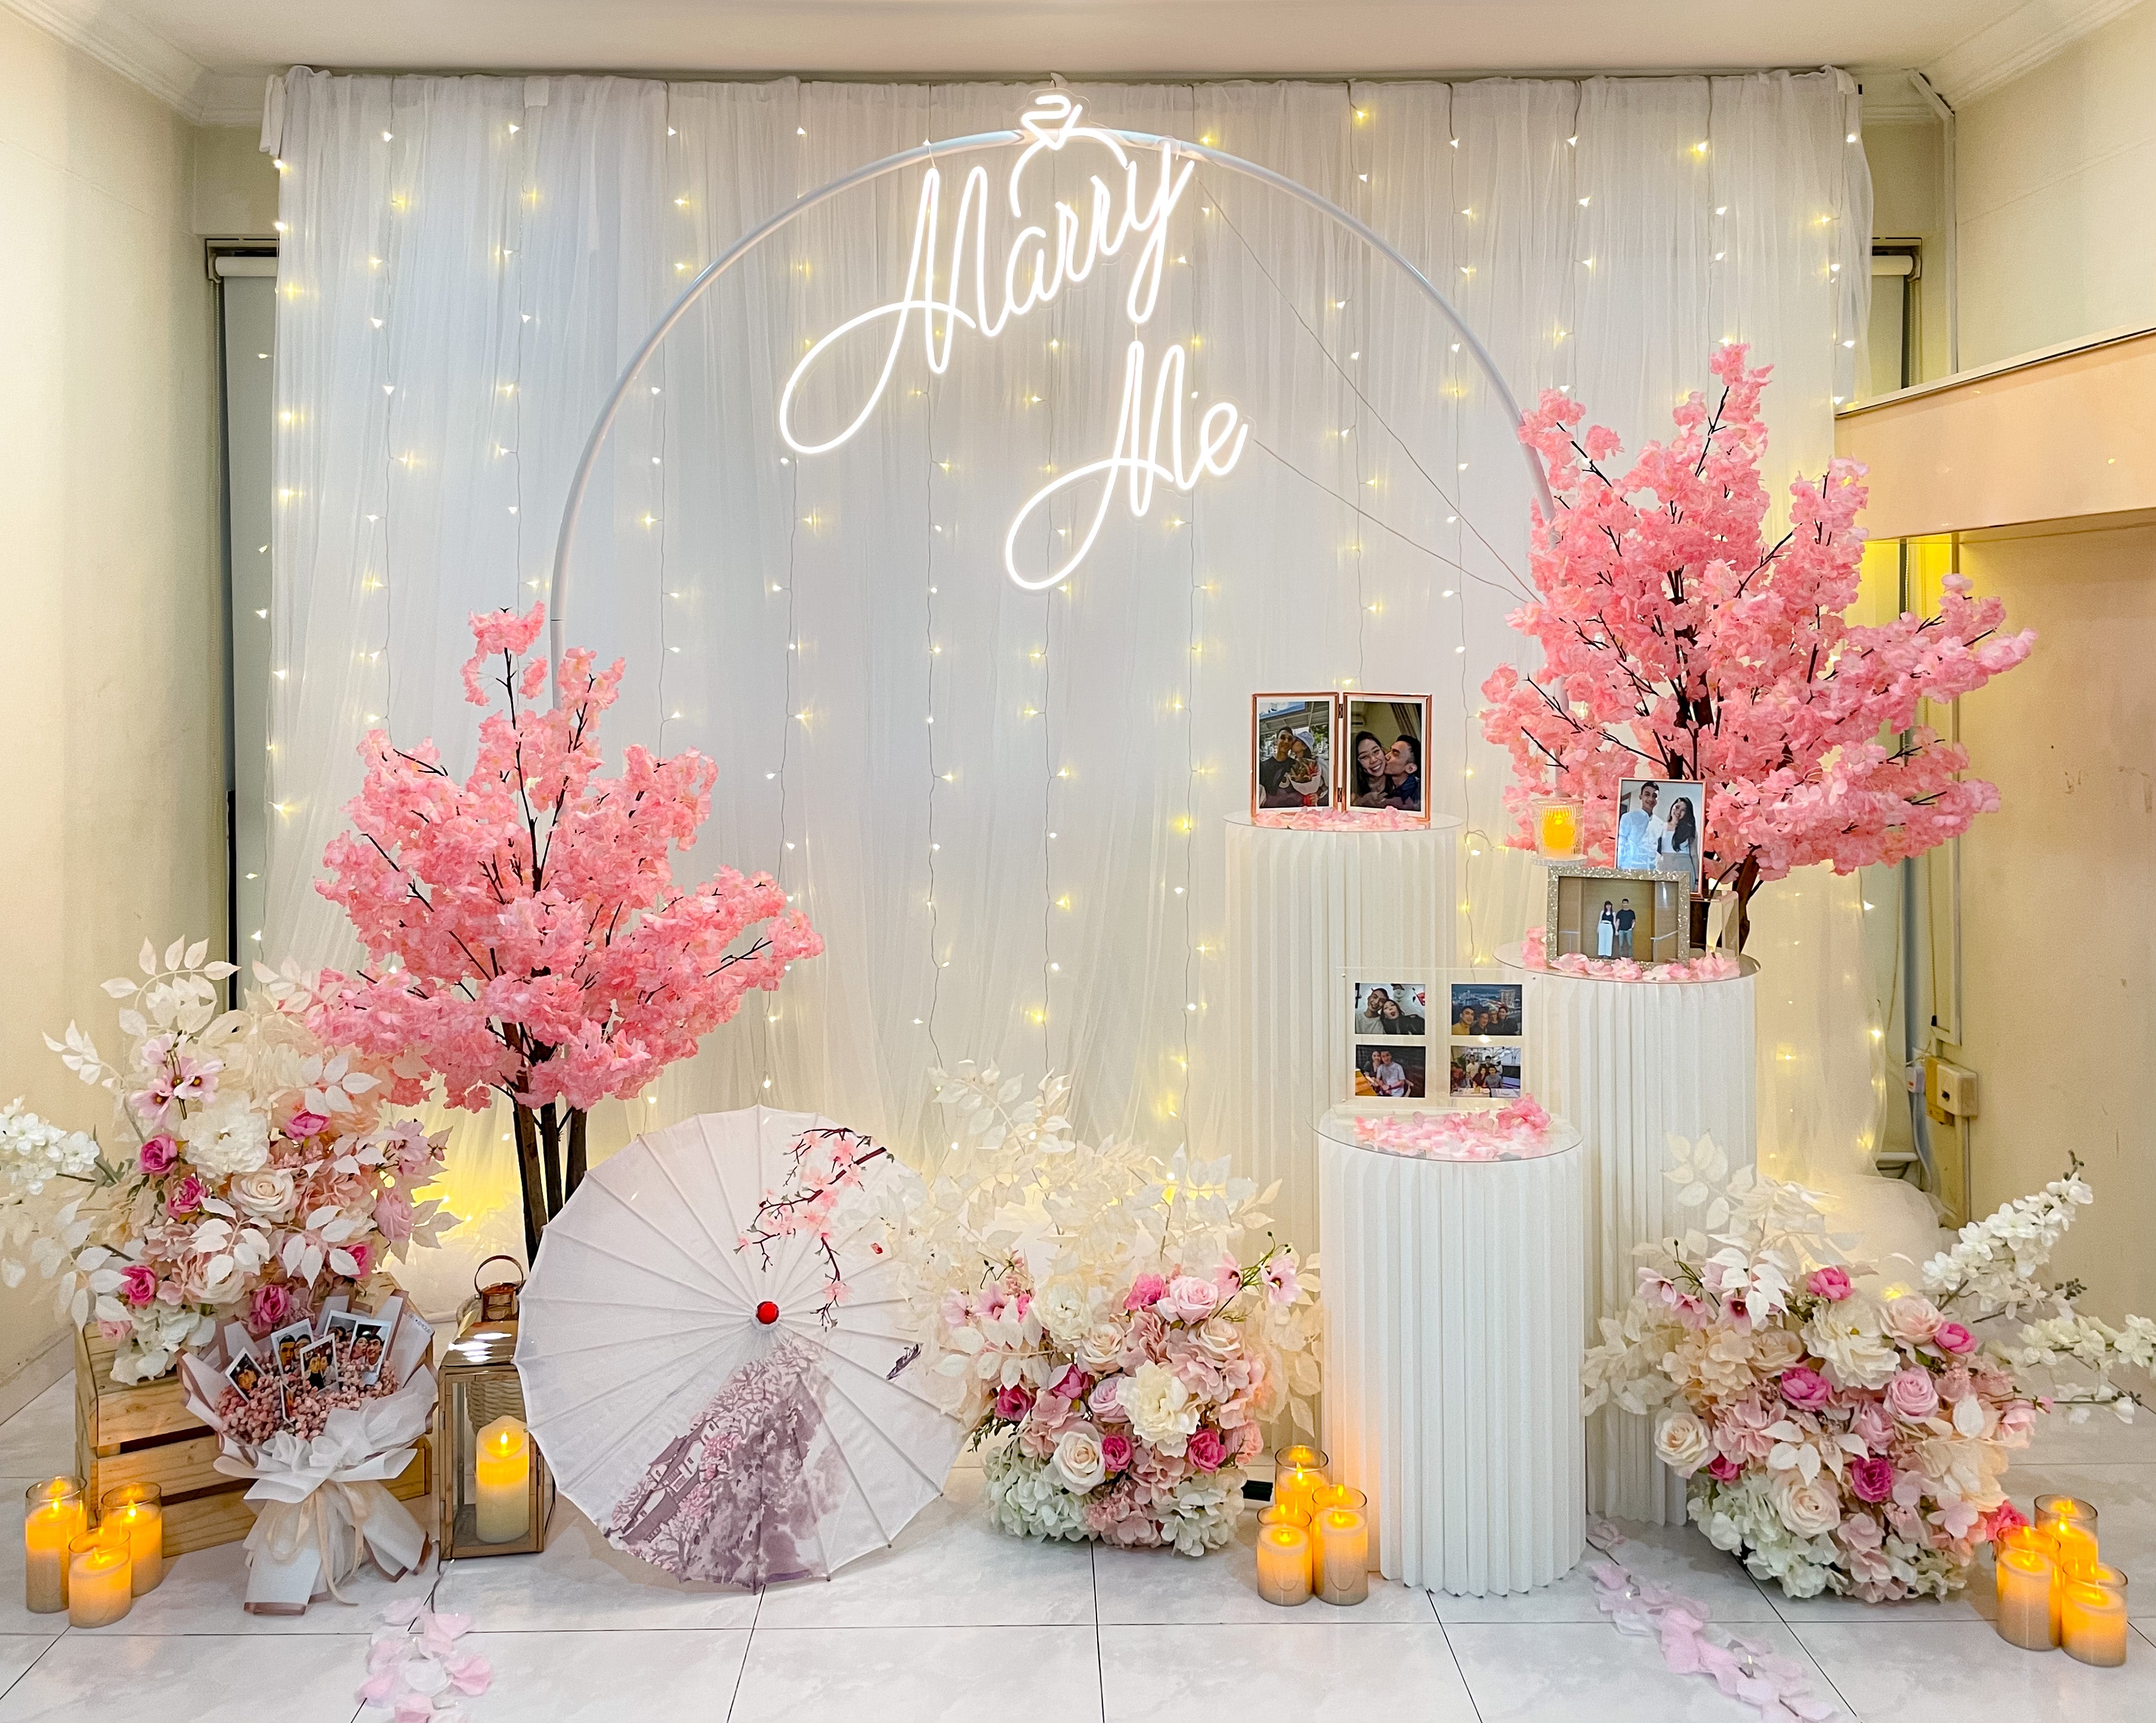 Romantic Home Proposal Decor in Singapore with Fairylight Backdrop, Cherry Blossoms, Flowers and Neon Sign by Style It Simply